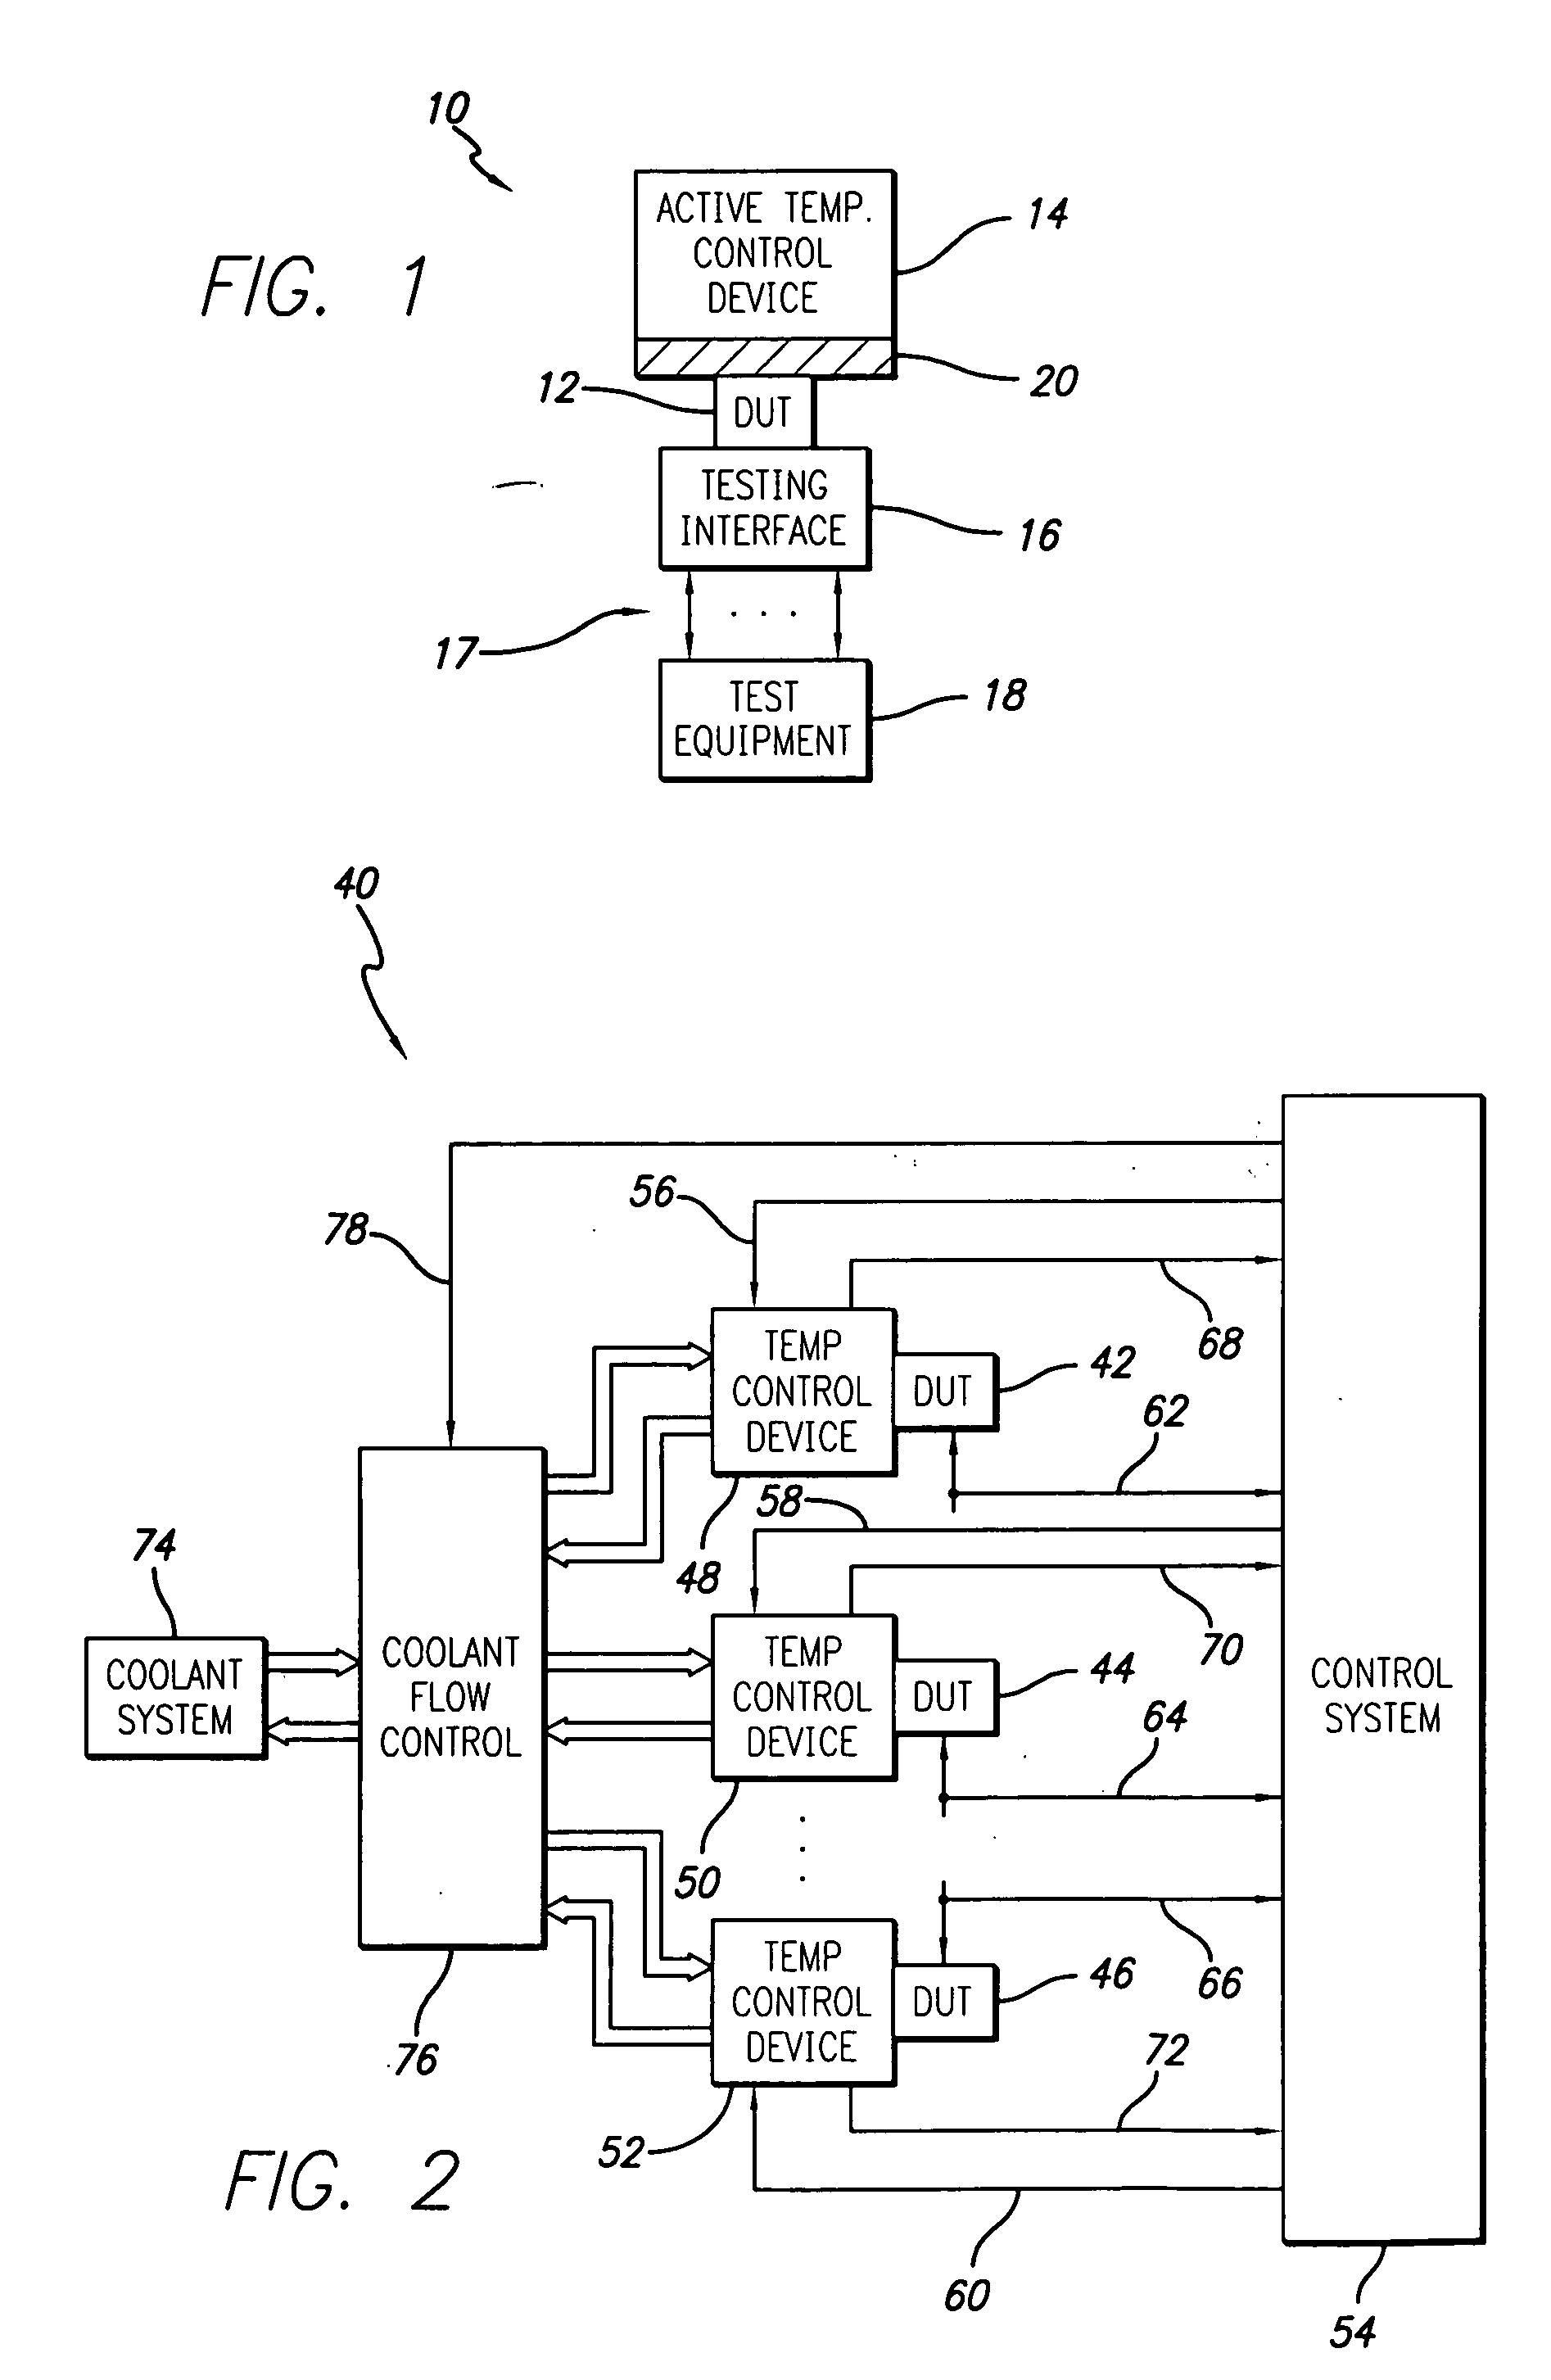 Active thermal control system with miniature liquid-cooled temperature control device for electronic device testing